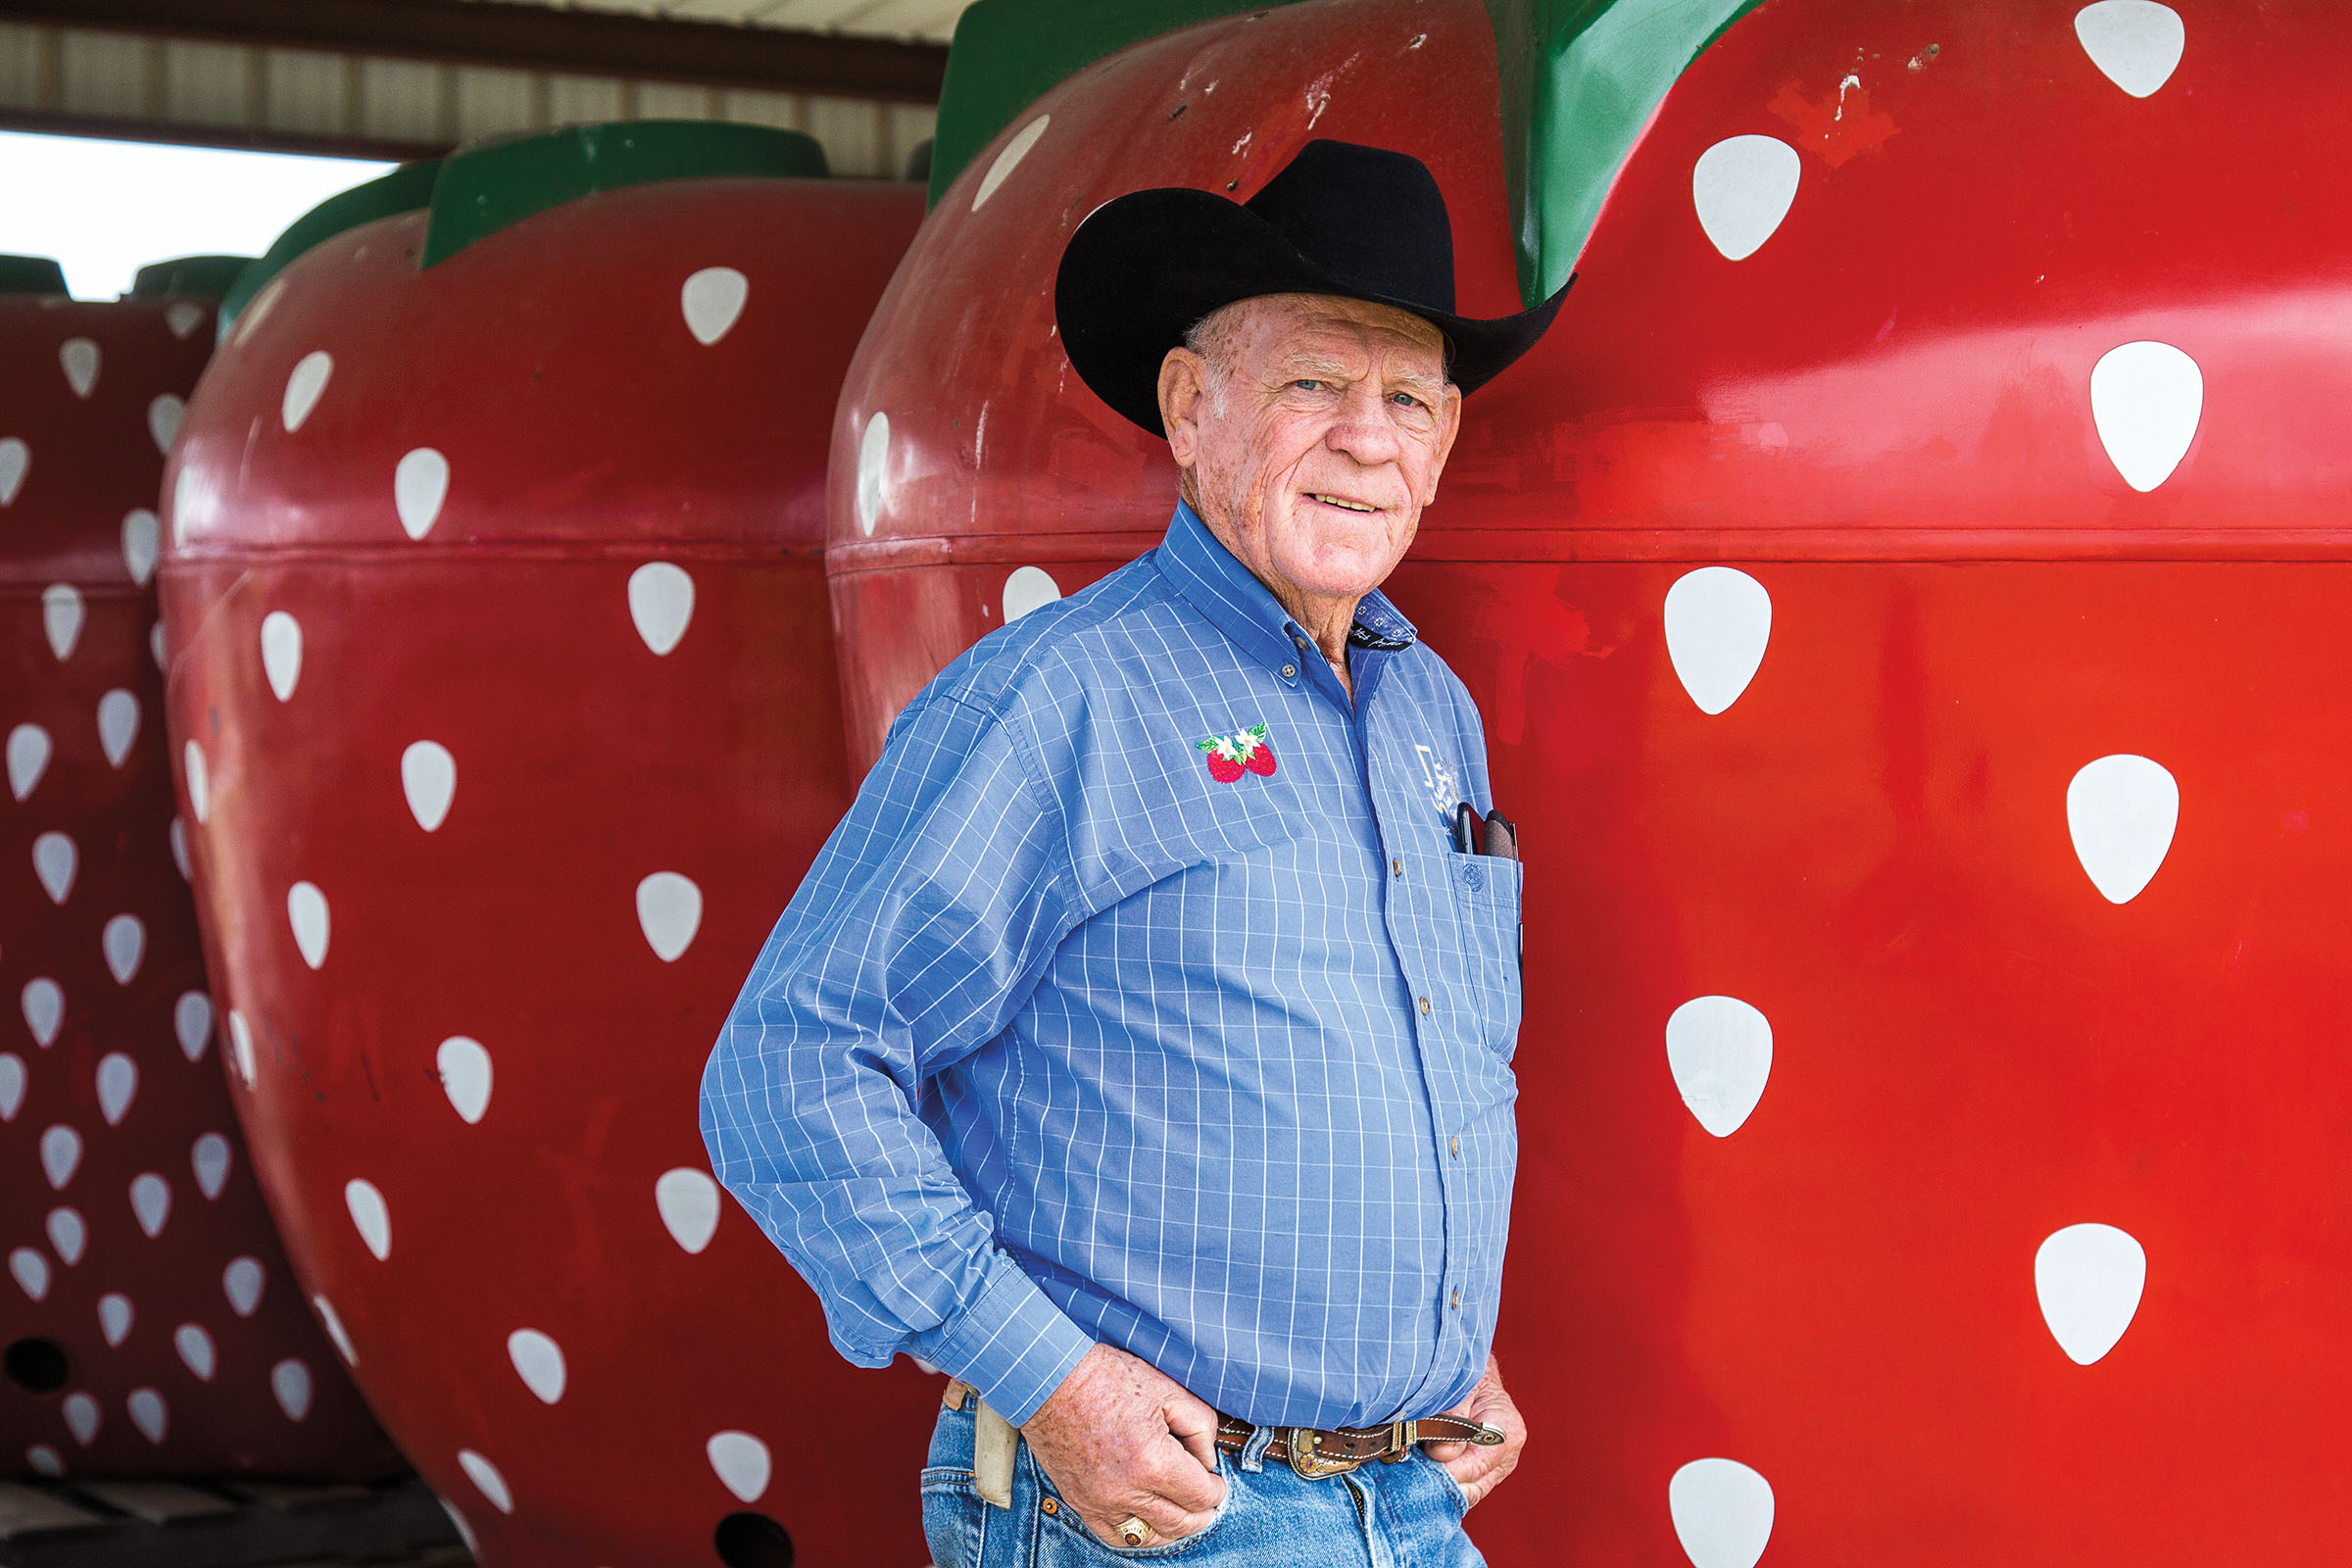 A man in a black cowboy hat stands in front of a large painted strawberry with white seeds